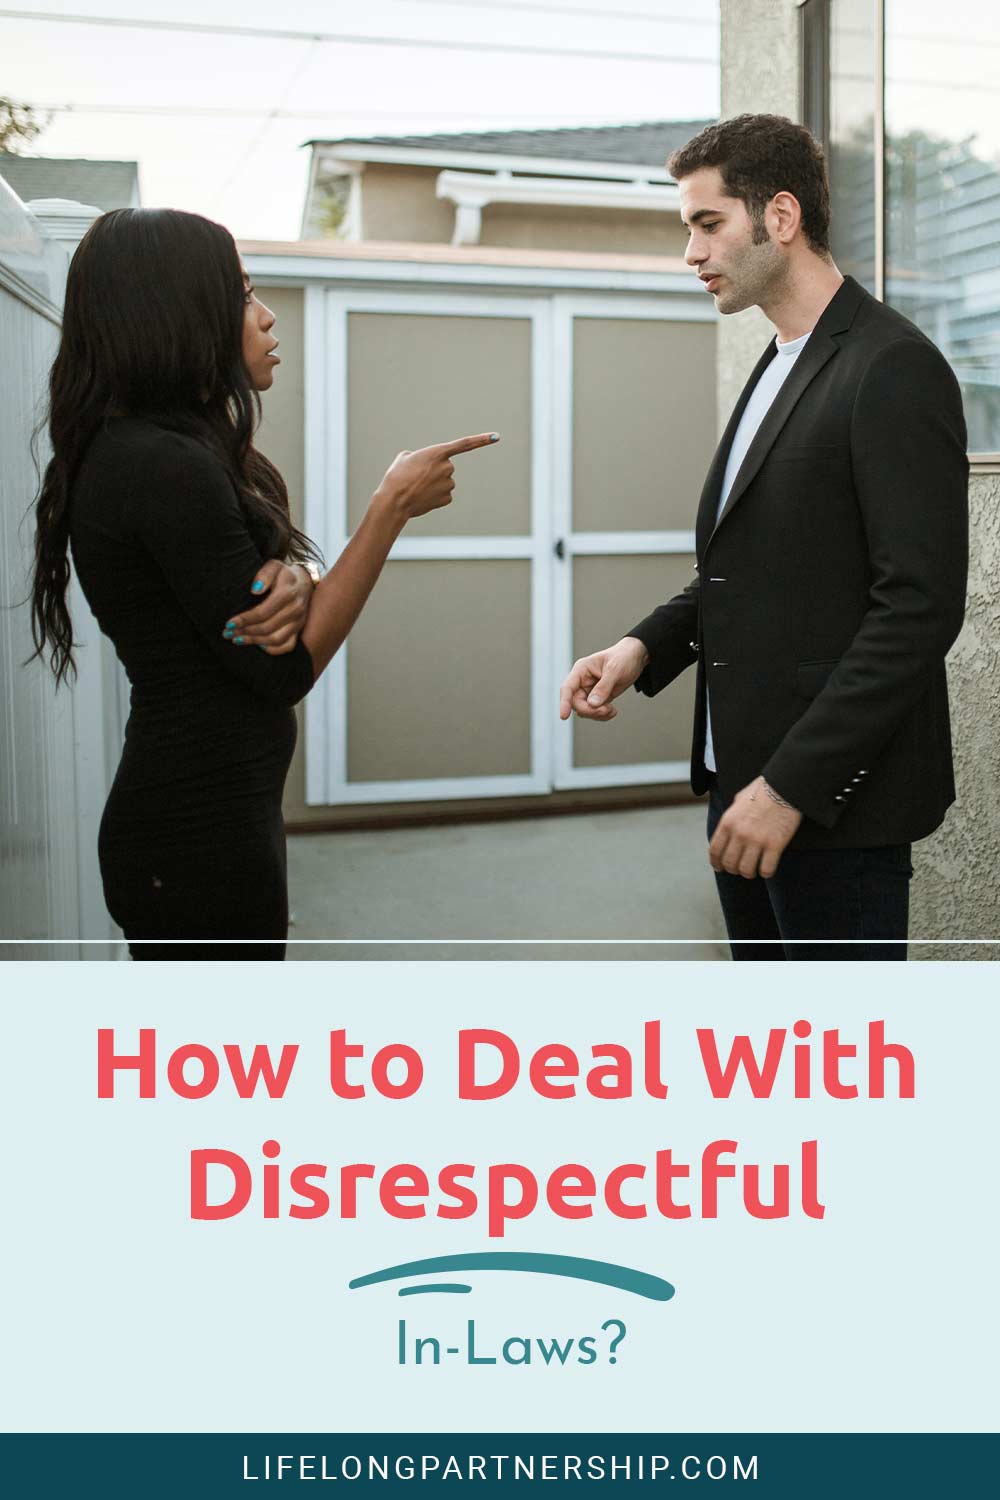 How to Deal With Disrespectful In-Laws?